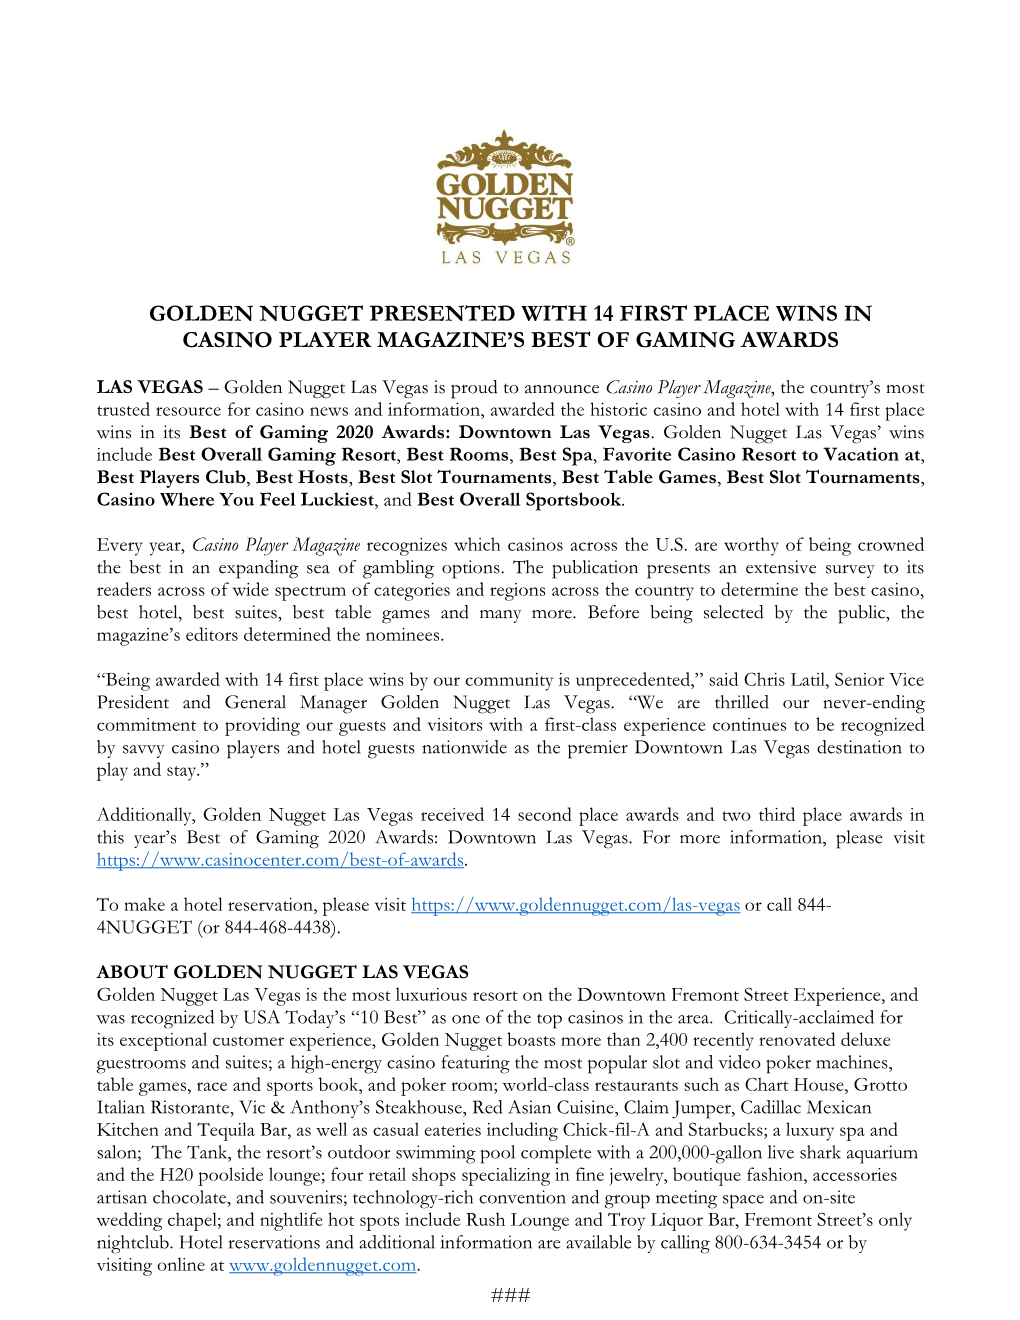 Golden Nugget Presented with 14 First Place Wins in Casino Player Magazine's Best of Gaming Awards